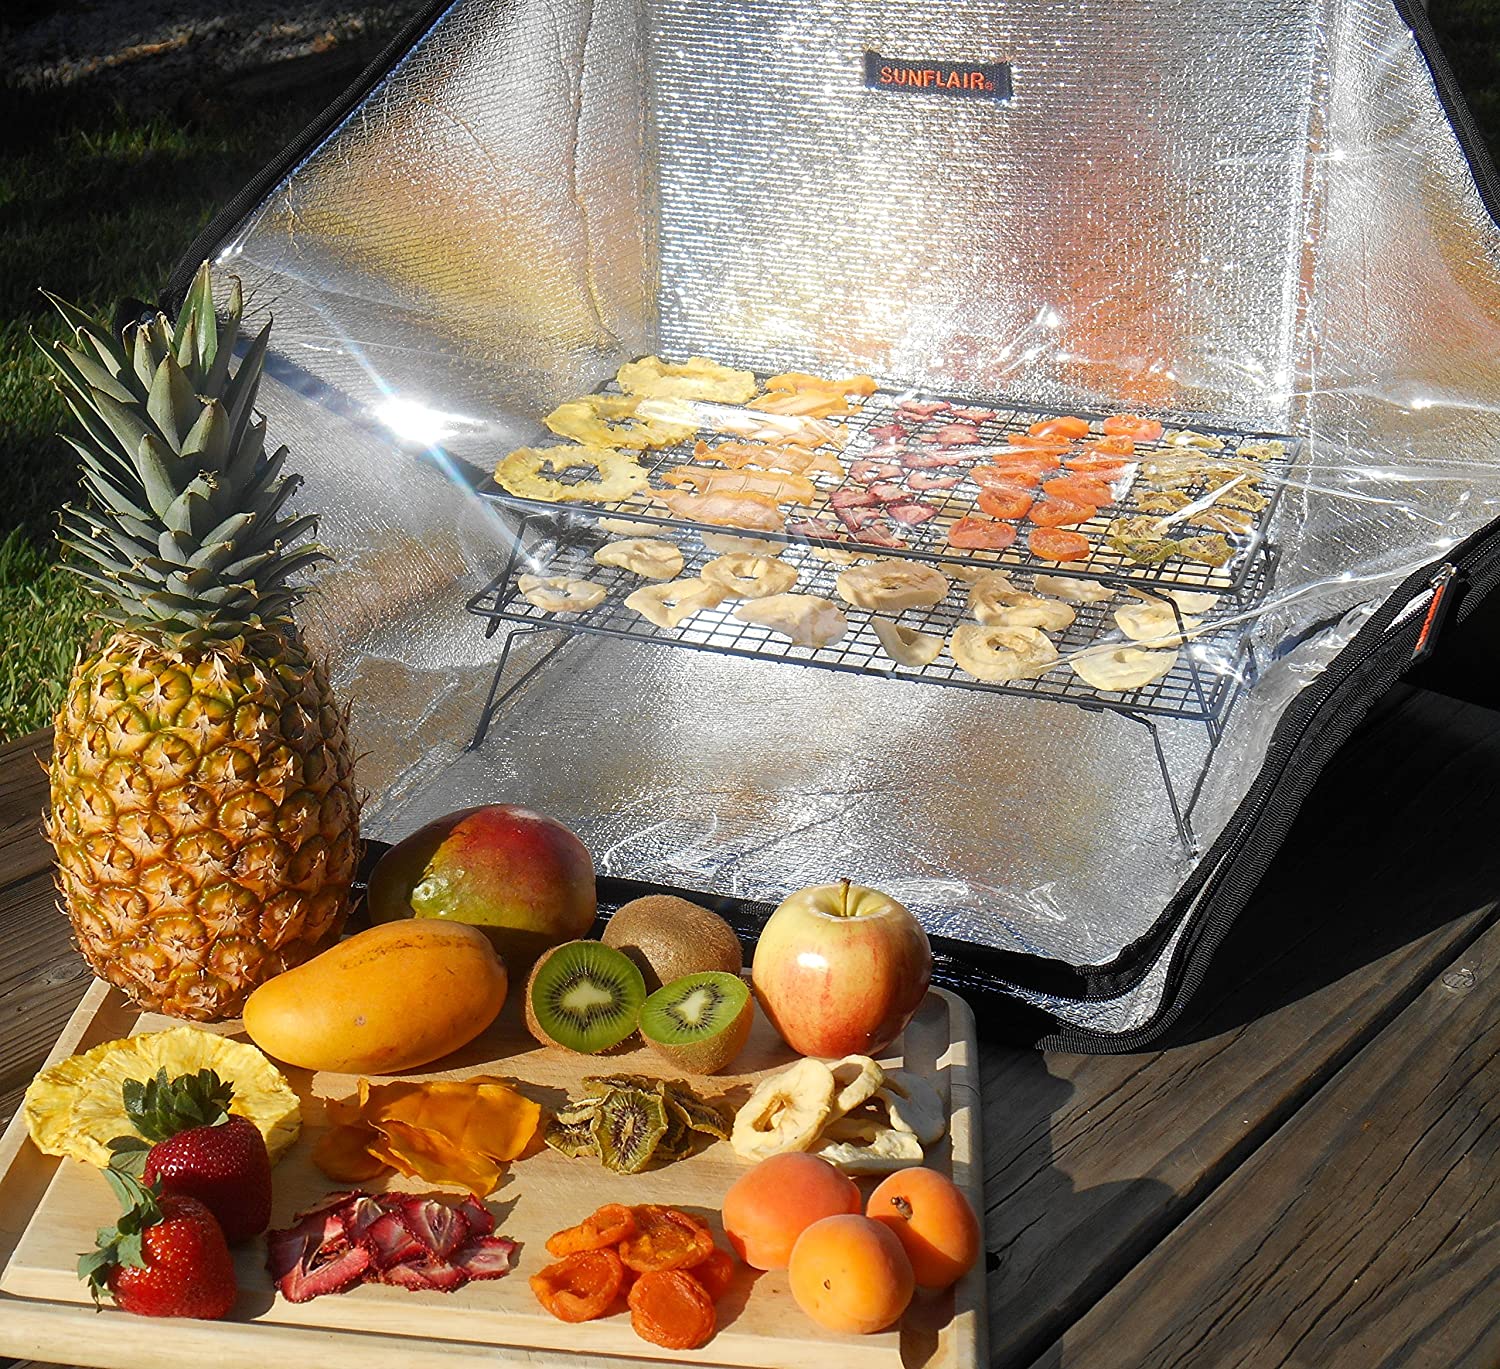 Sunflair Solar Oven -Dehydrating fruit